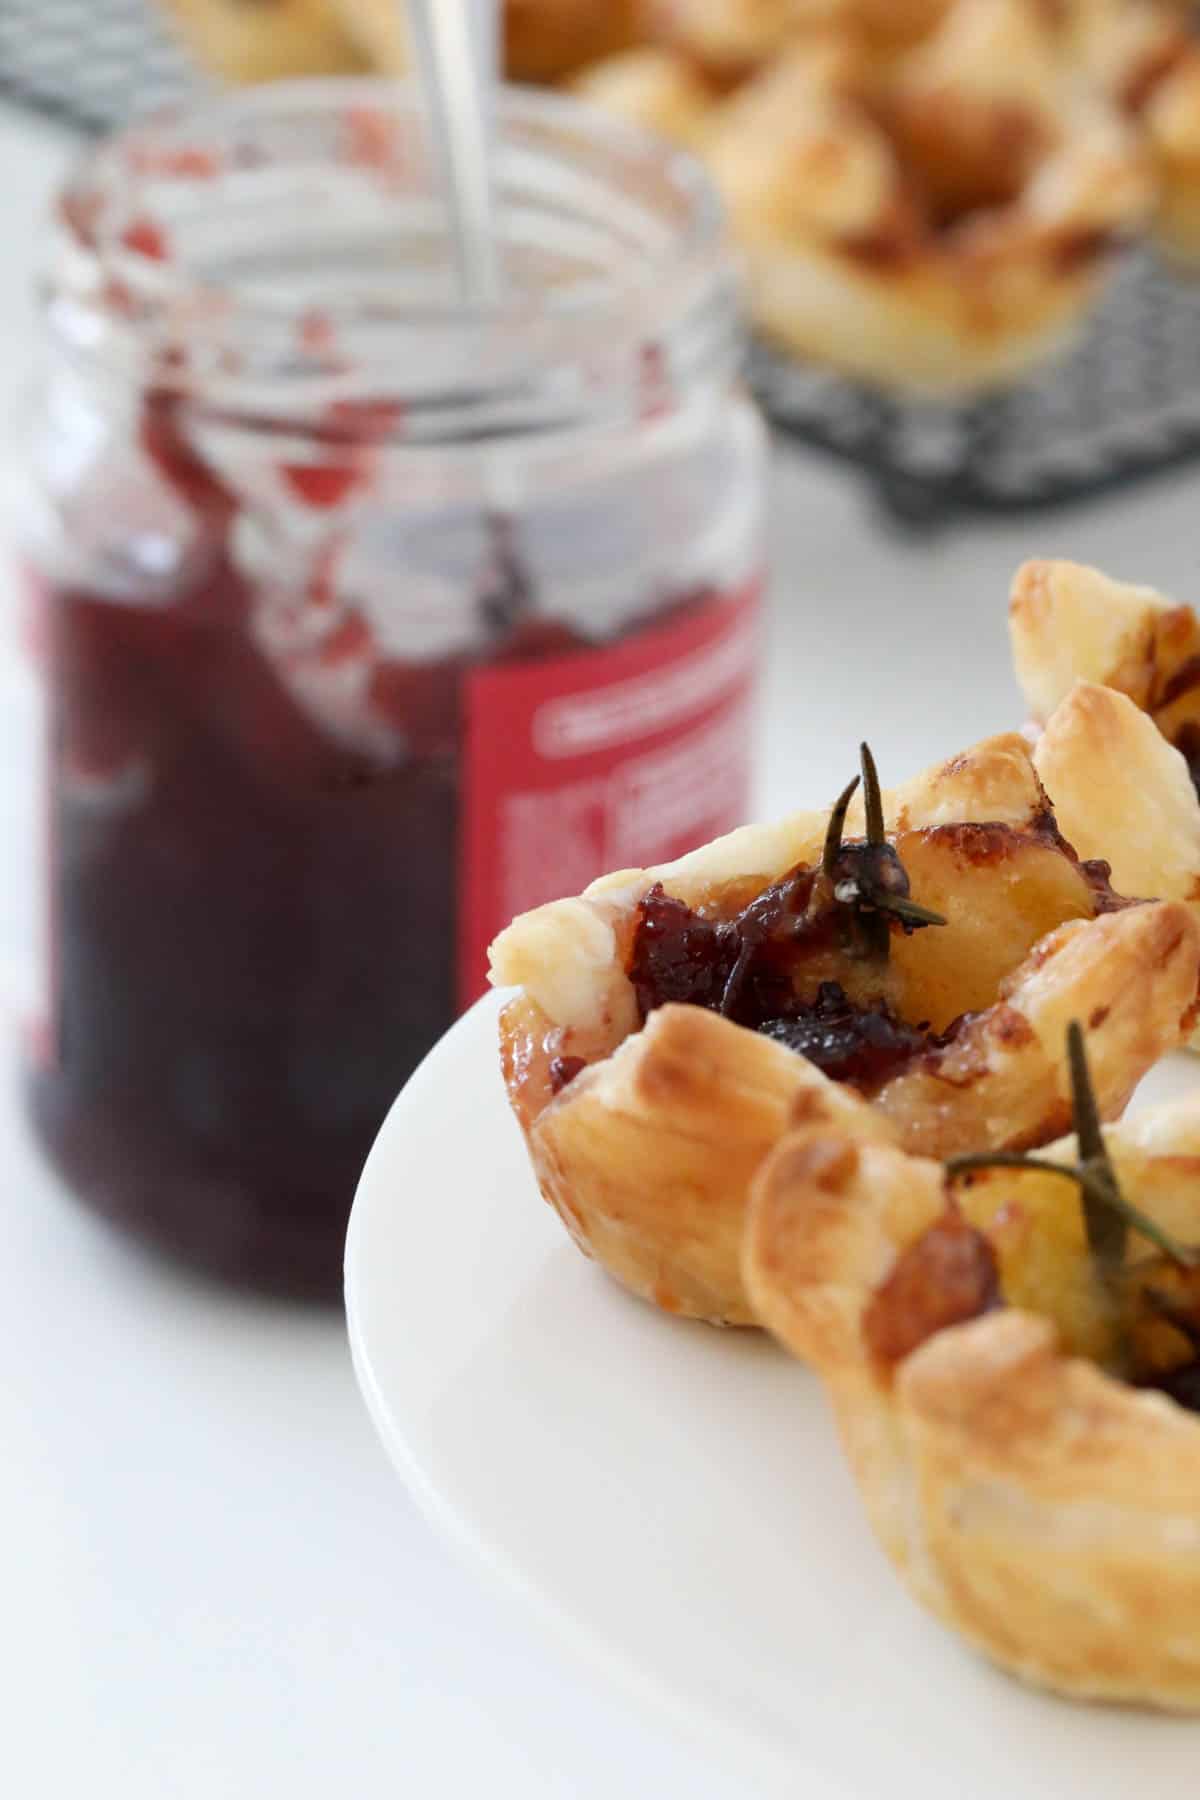 A jar of cranberry sauce behind a plate of puff pastry bites.